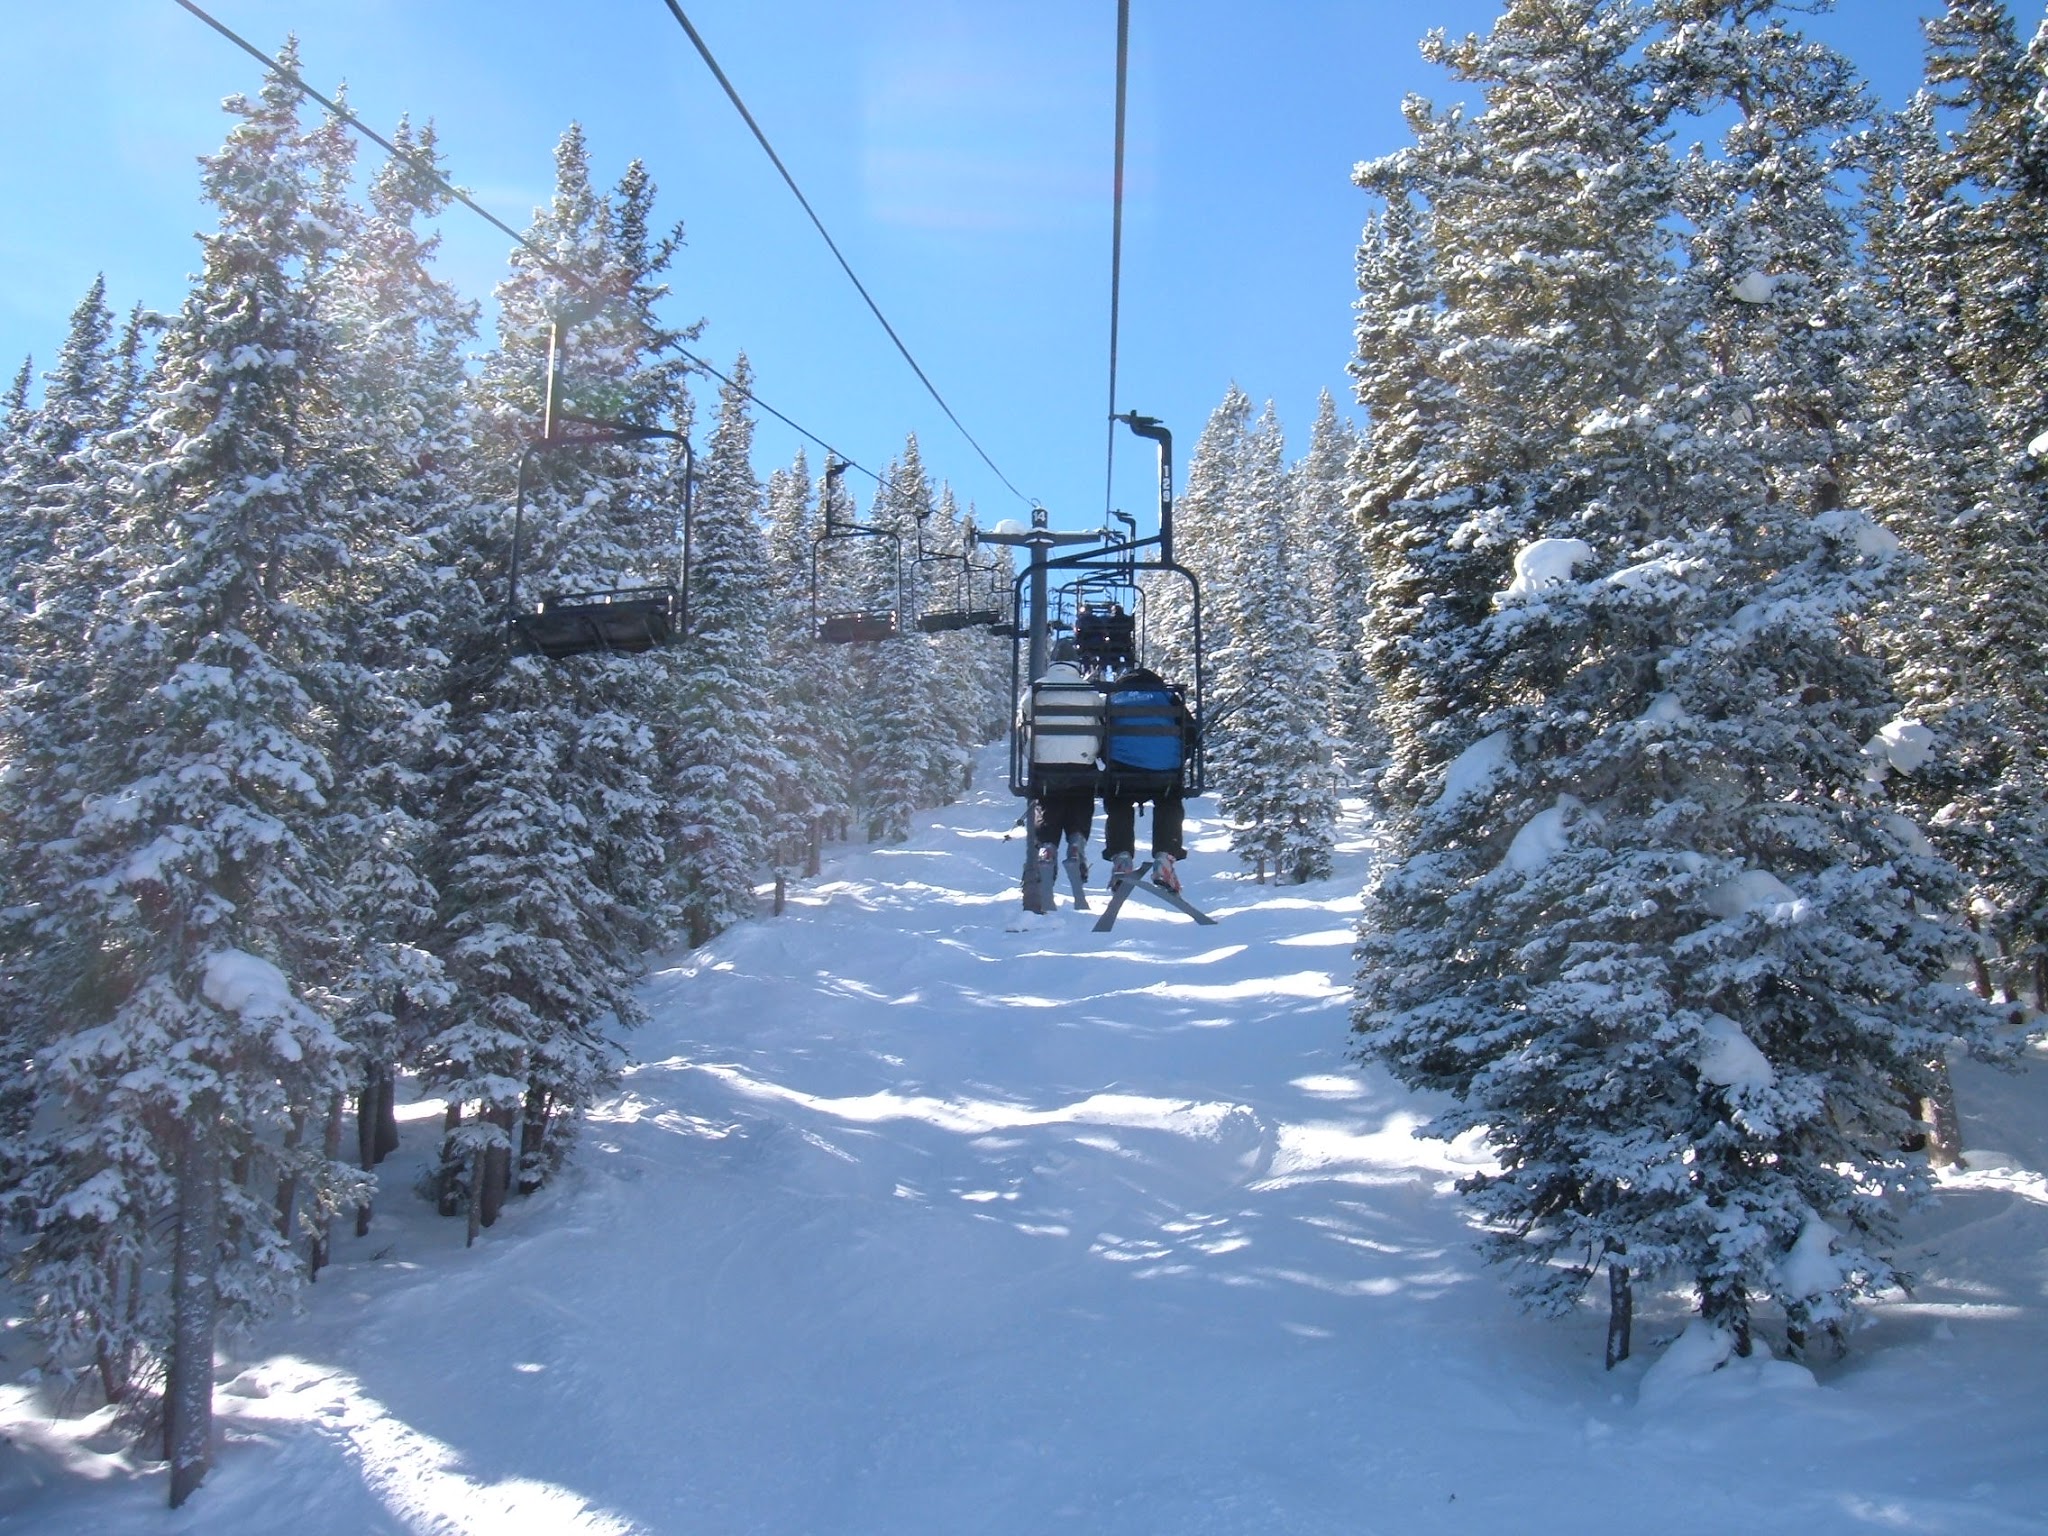 Chairlift ride through the narrow tree lined run. Blue ski with the sun shinning through the trees.